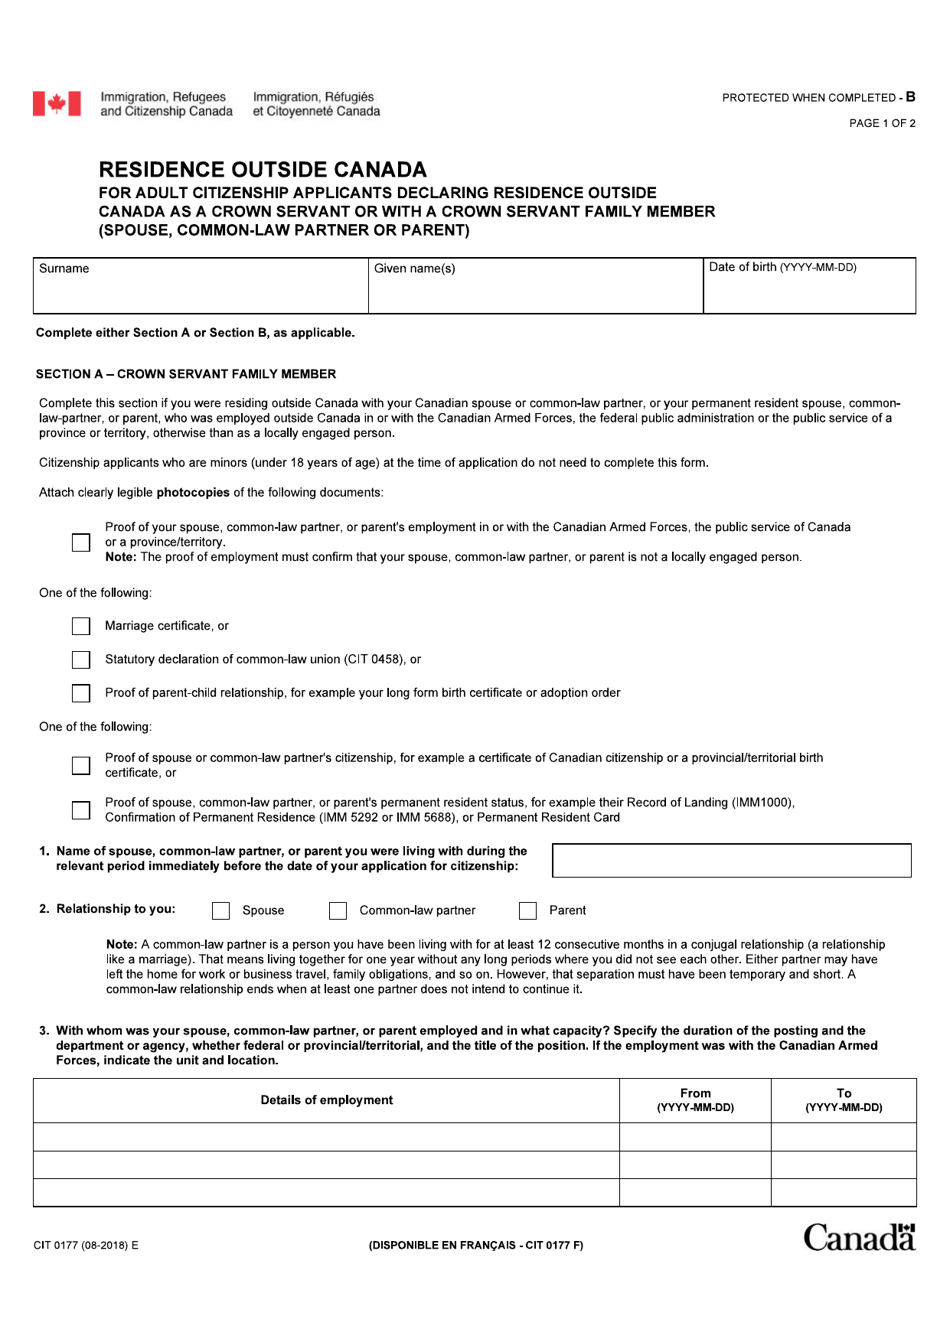 Form CIT0177 Residence Outside Canada for Adult Citizenship Applicants Declaring Residence Outside Canada as a Crown Servant or With a Crown Servant Family Member (Spouse, Common-Law Partner or Parent) - Canada, Page 1